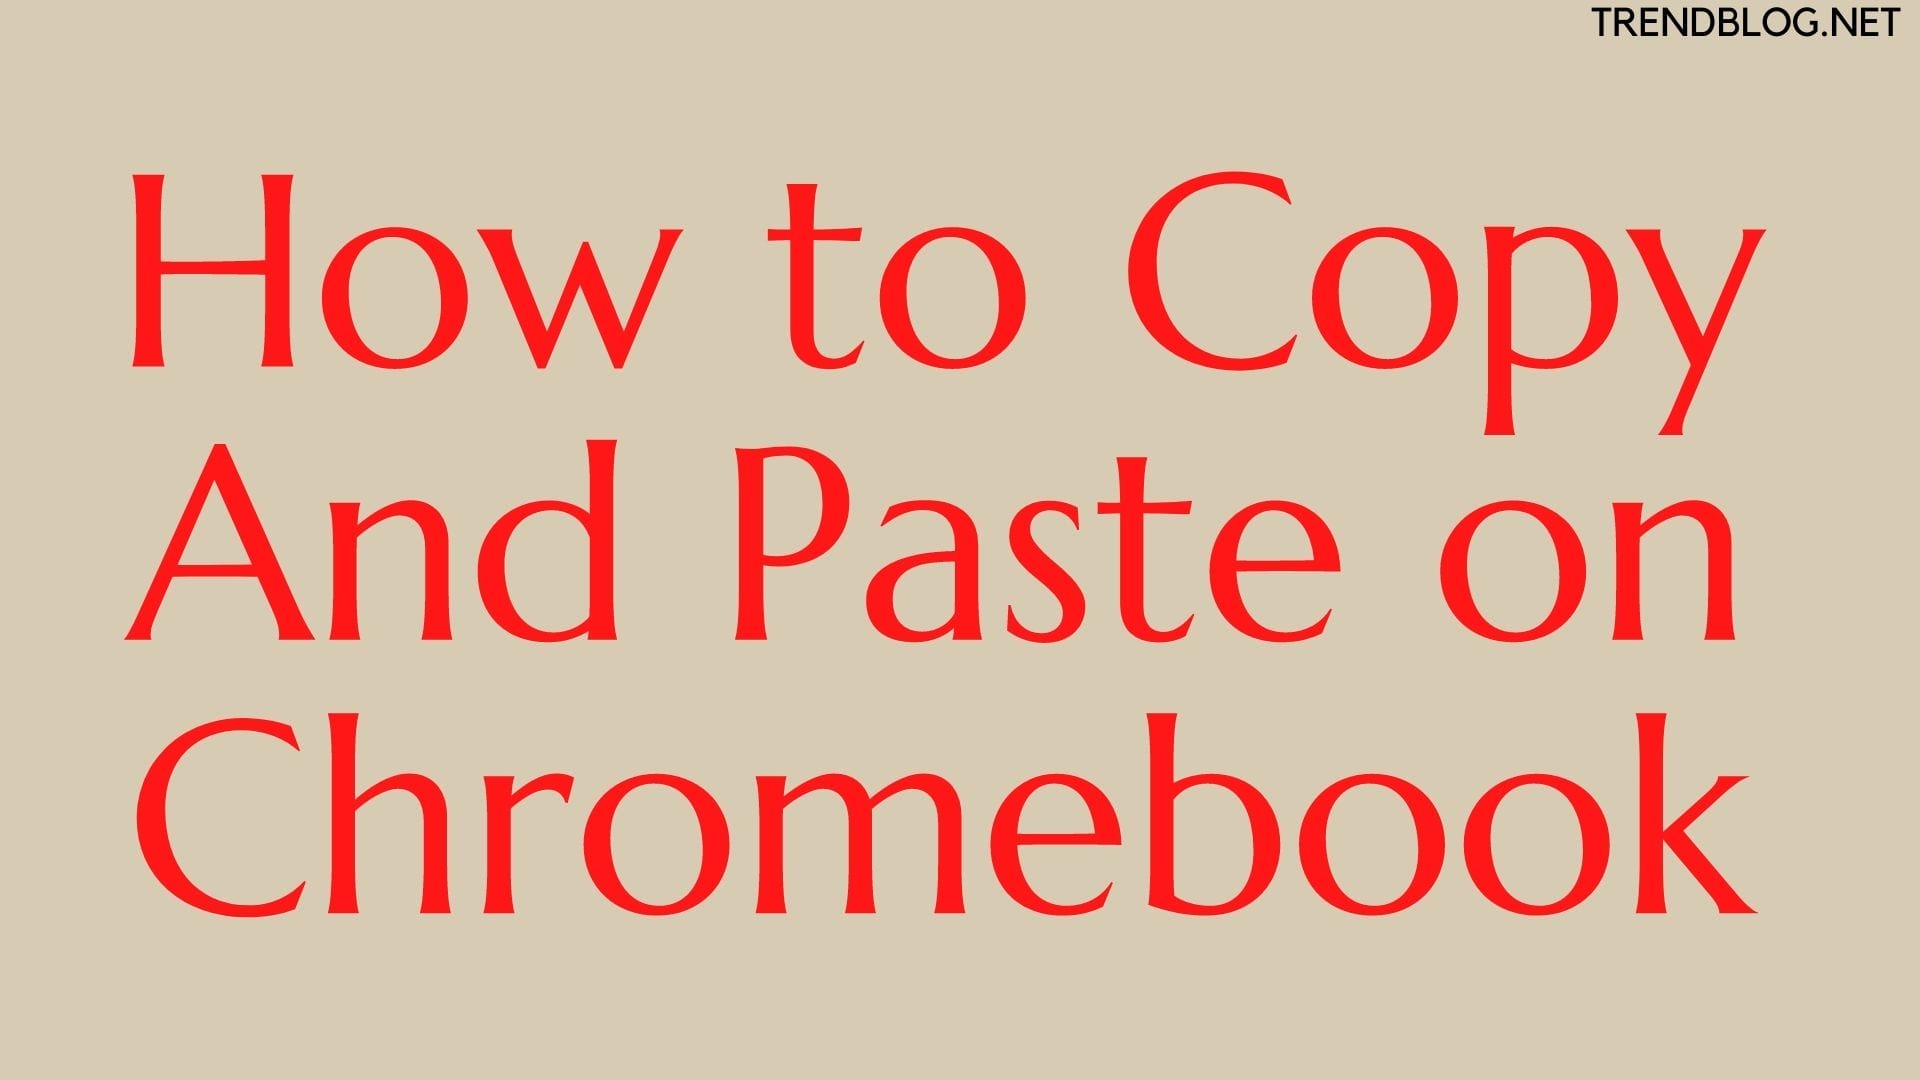 How to Copy And Paste on Chromebook